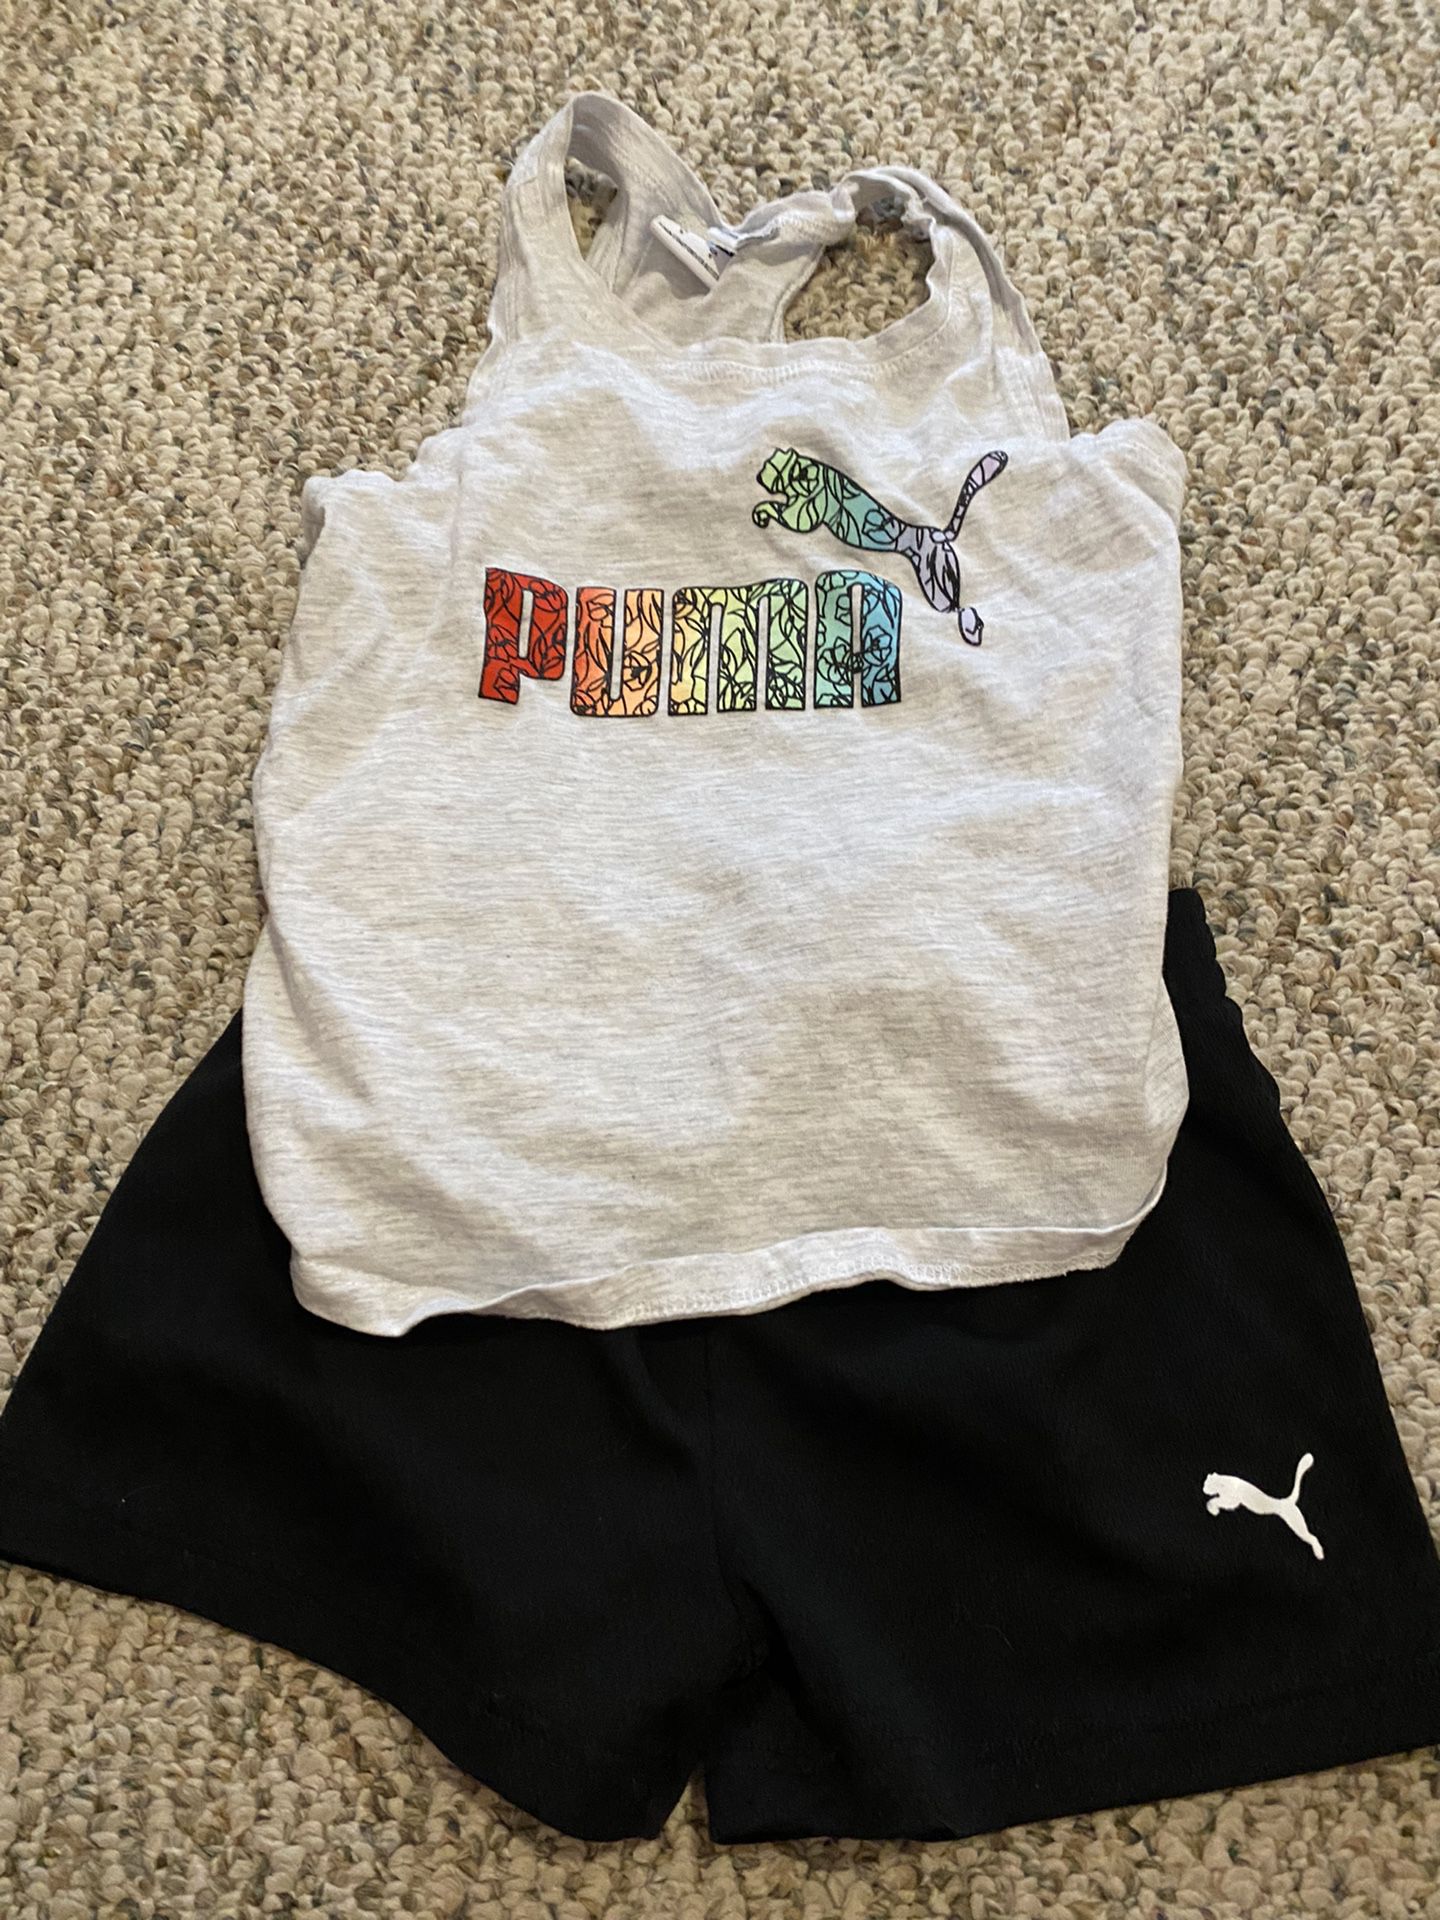 Girl’s puma shorts outfit